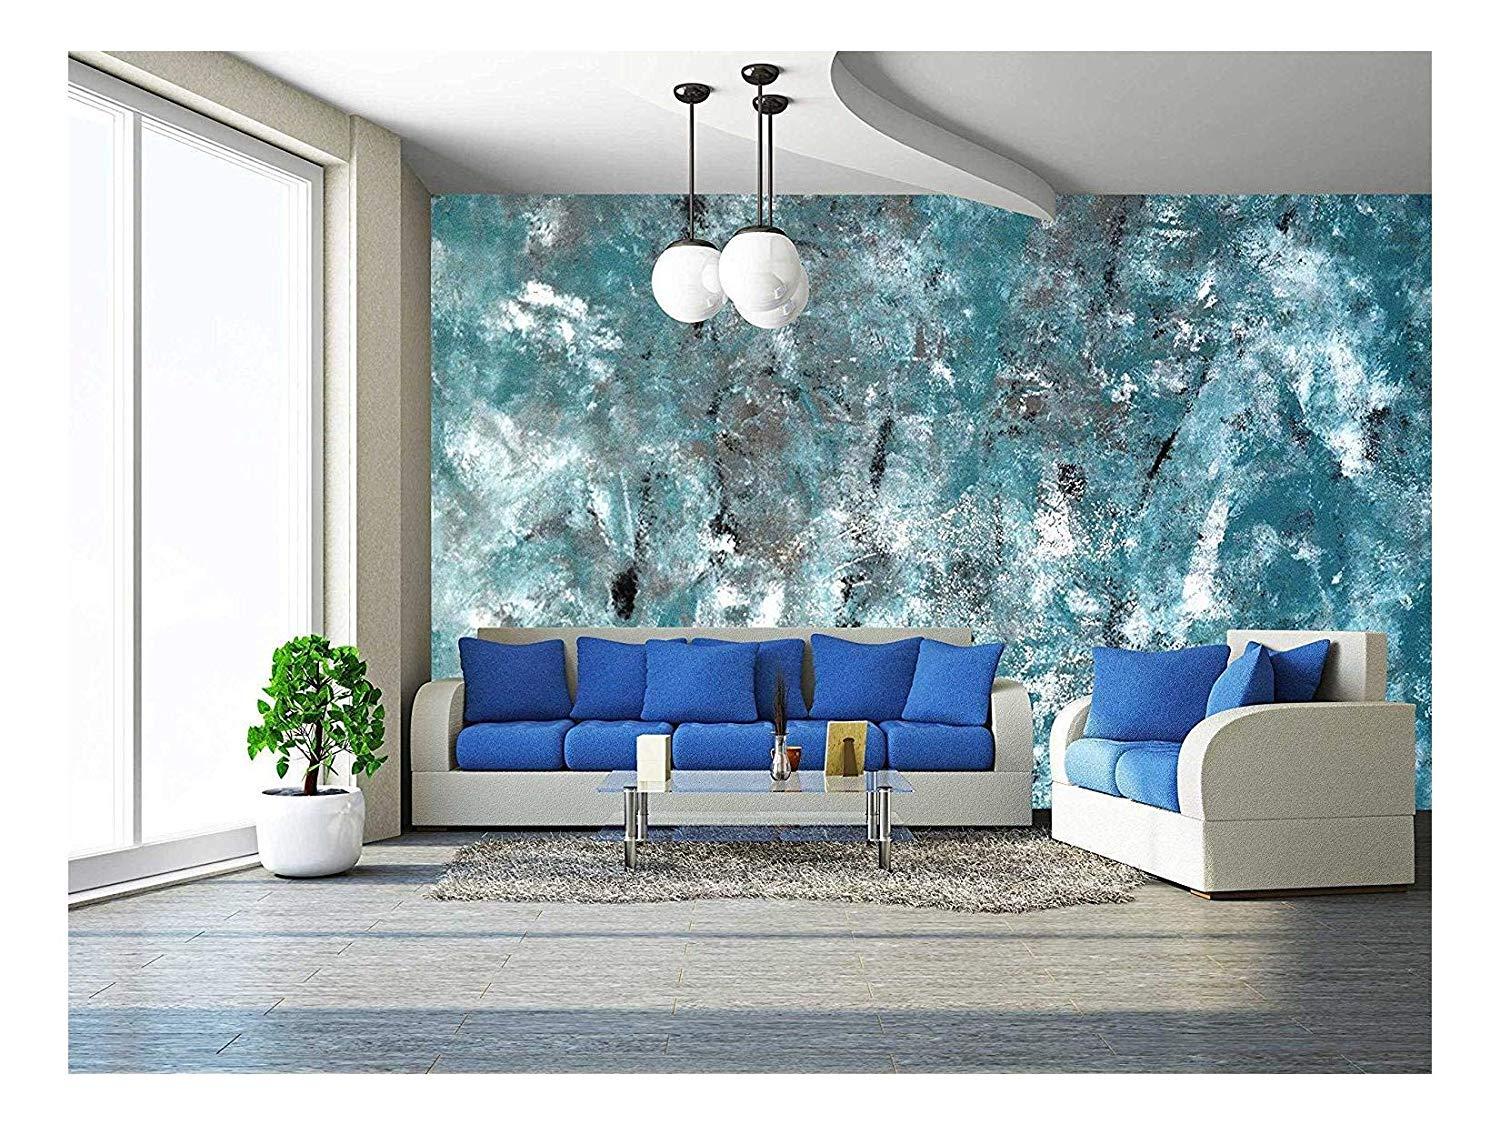 1500 x 1125 · jpeg - wall26 - Teal and Grey Abstract Art Painting - Removable Wall Mural ...